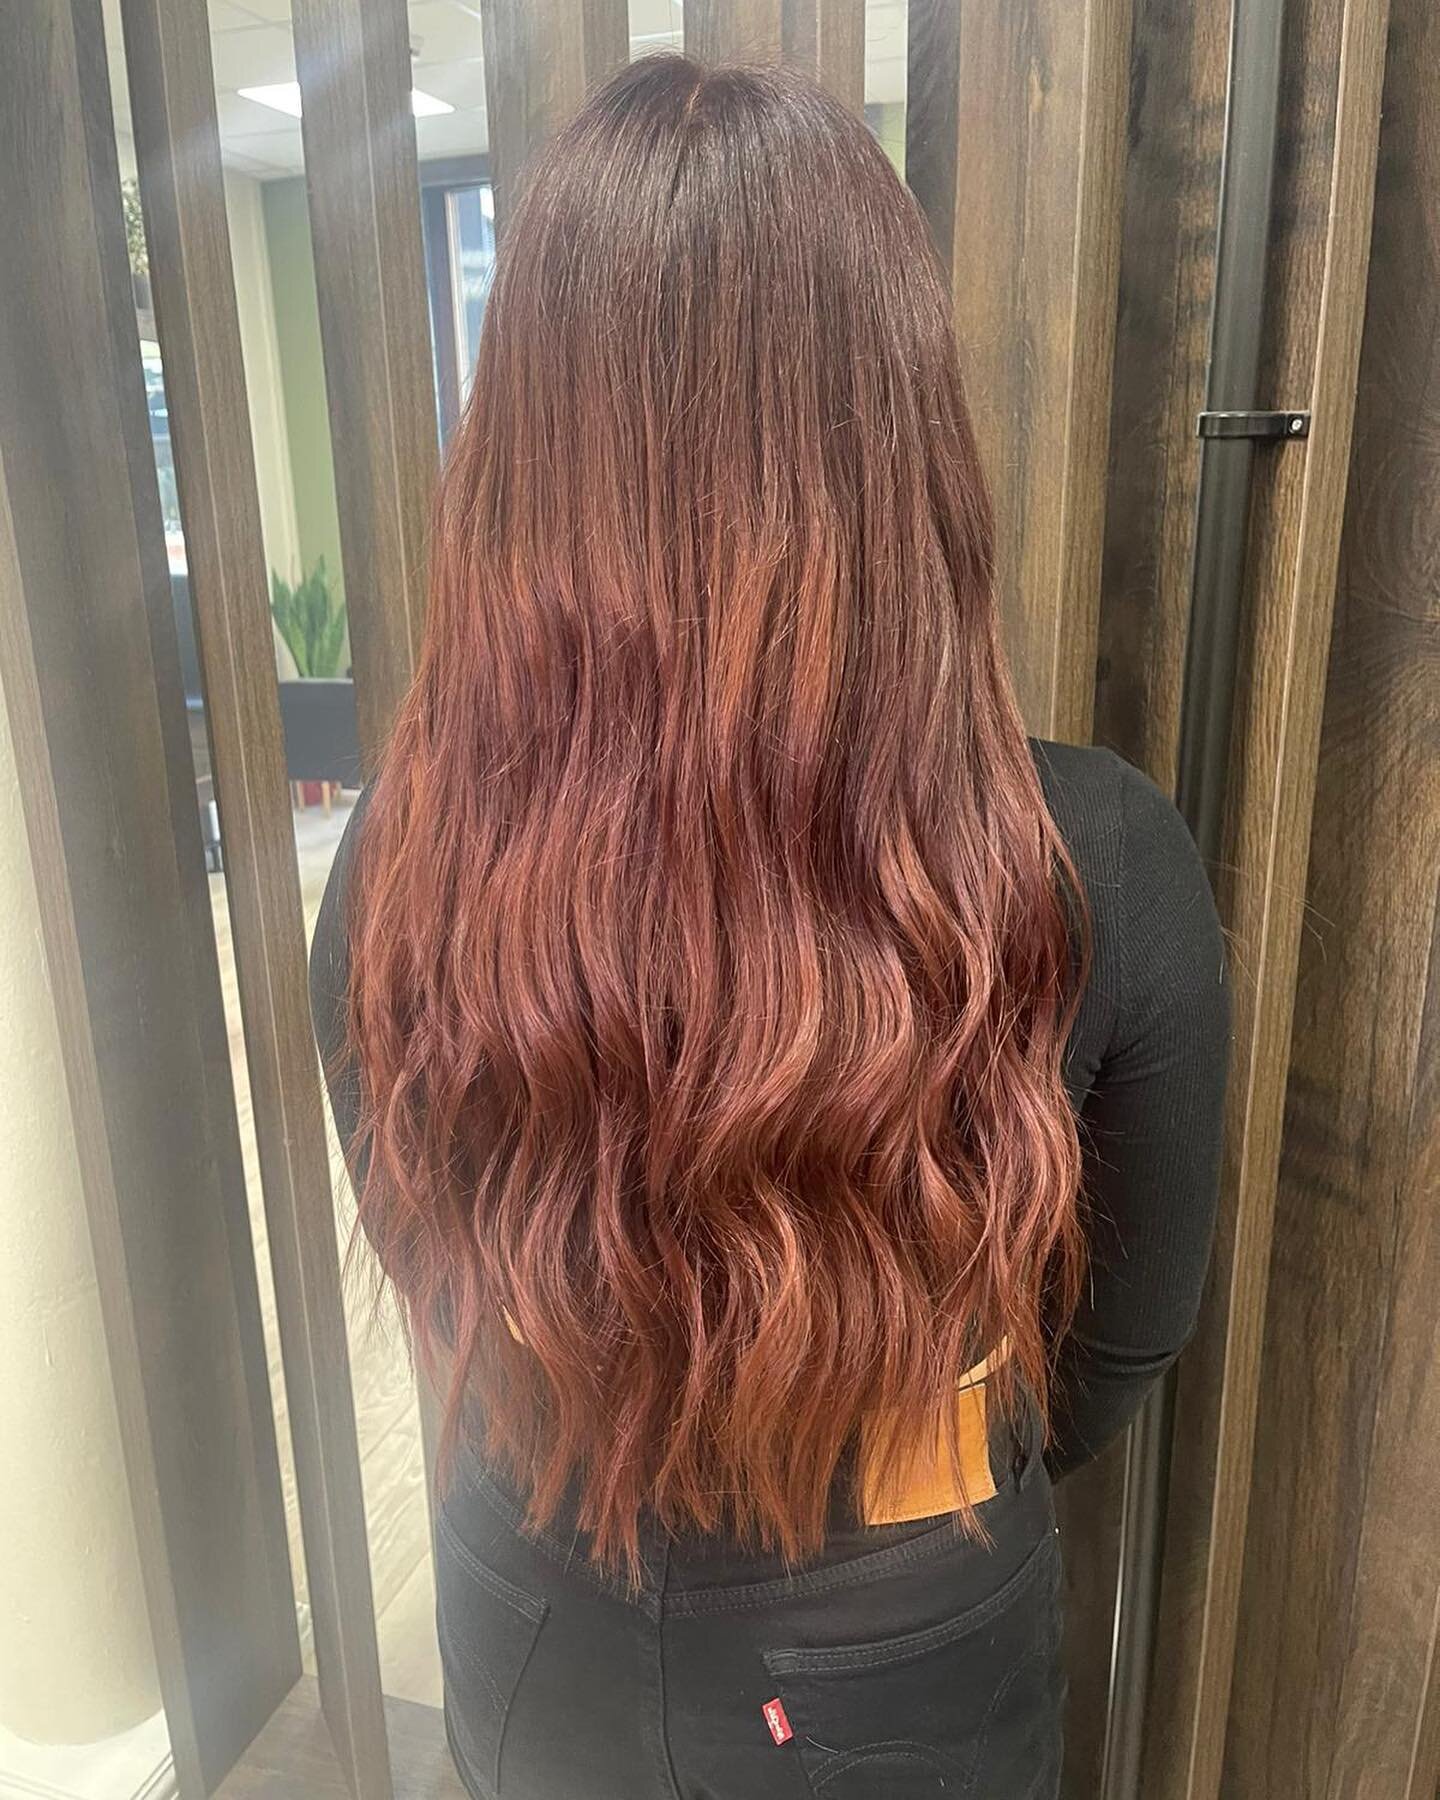 A great hairstyle really is the best accessory 😉

📌 40-46 Dale Street, Liverpool, L2 5SF

#dothairliverpool #lorealpro #lorealpro #iamahairartist #iamahairartistwin #frenchbalayage #frenchglossing #liverpoolsalon #liverpoolhair #liverpoolhairdresse